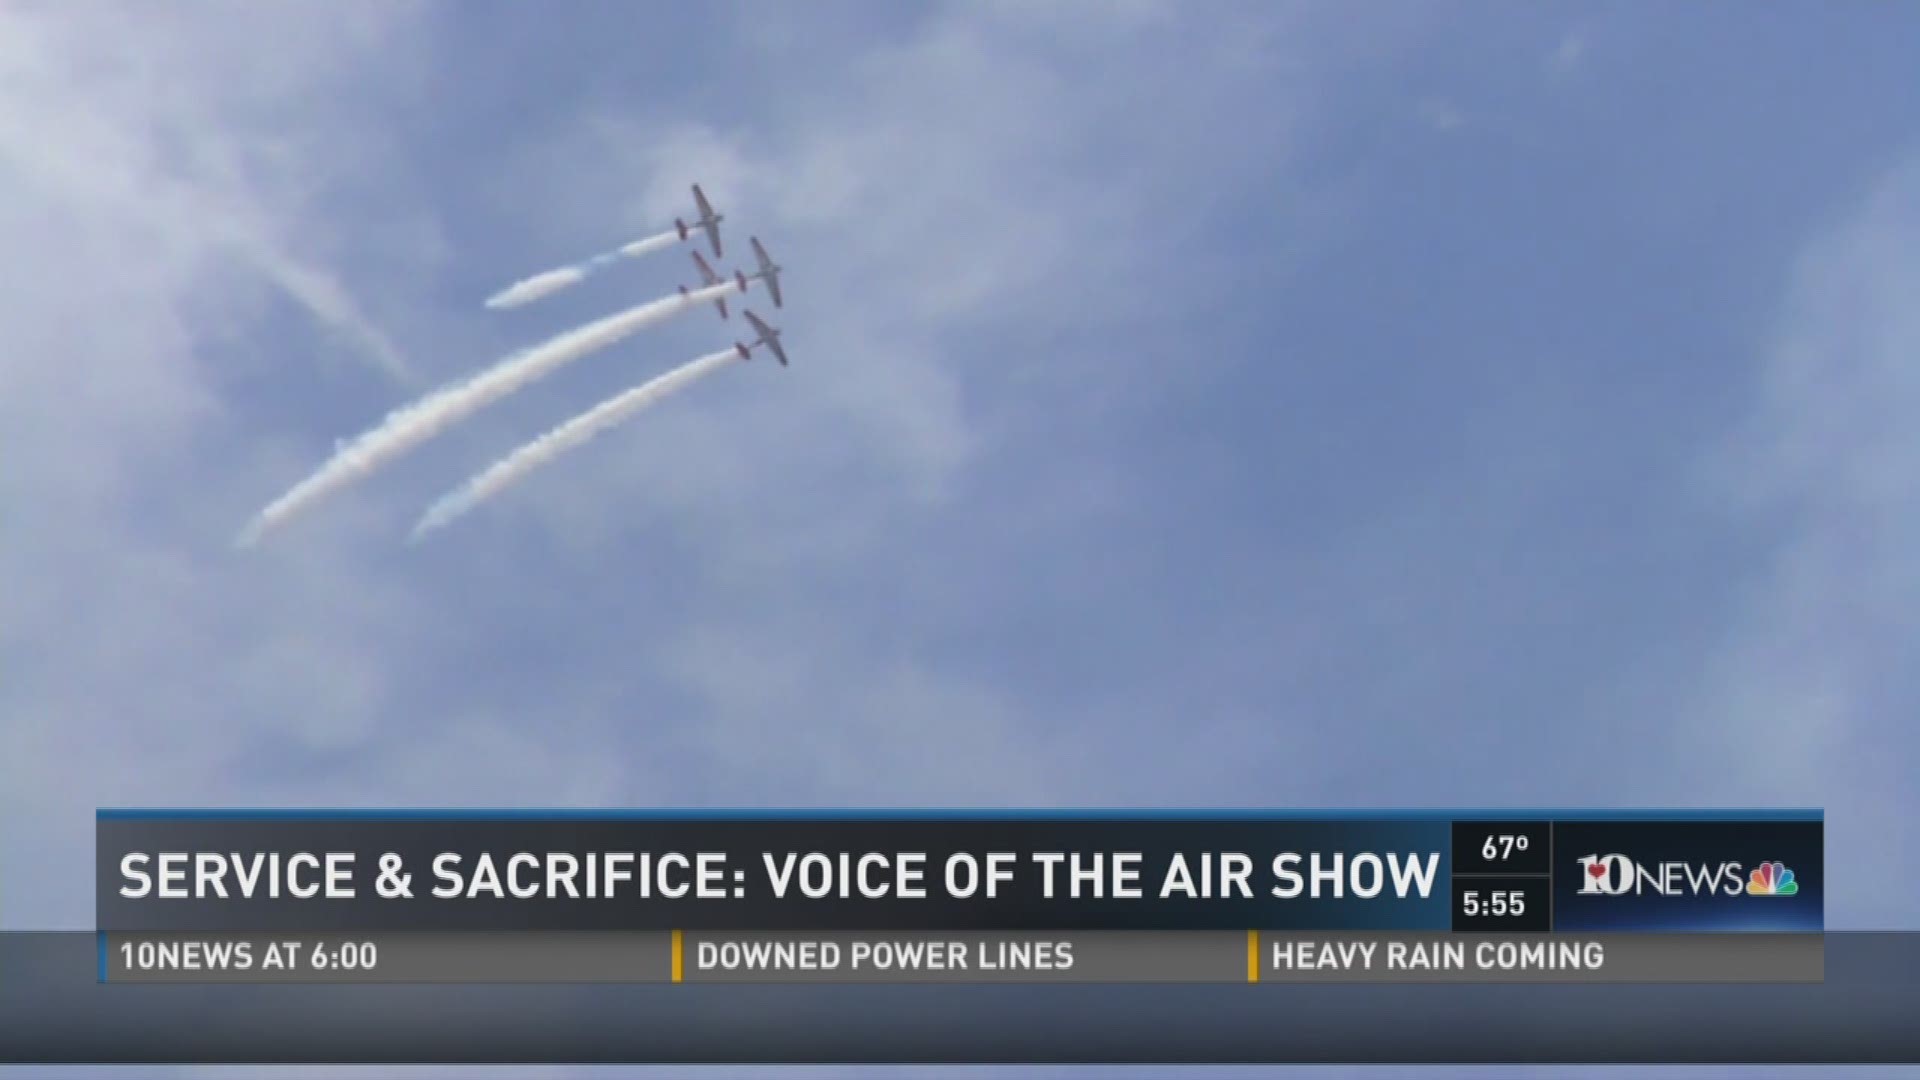 Right along with the Blue Angels and other aerobatic planes, one "voice" will echo across the skies of the Smoky Mountain Air Show. 10News anchor John Becker introduces us to Rob Reider.